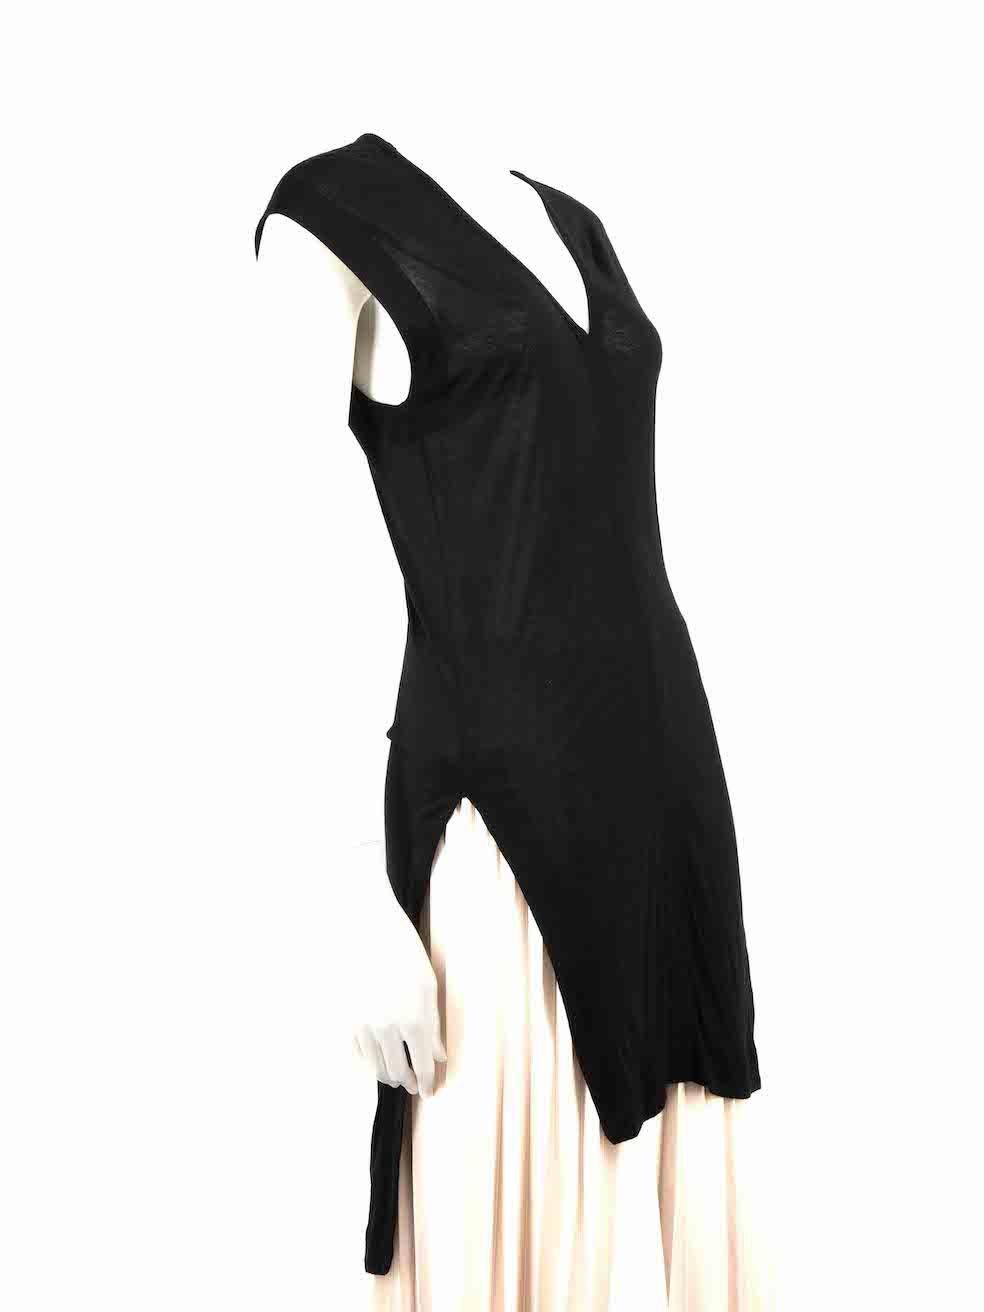 CONDITION is Never worn. No visible wear to top is evident on this new Helmut Lang designer resale item.
 
 Details
 Black
 Synthetic
 Top
 Short sleeves
 Sheer
 V-neck
 Split sides
 
 
 Made in Vietnam
 
 Composition
 100% Micro modal
 
 Care